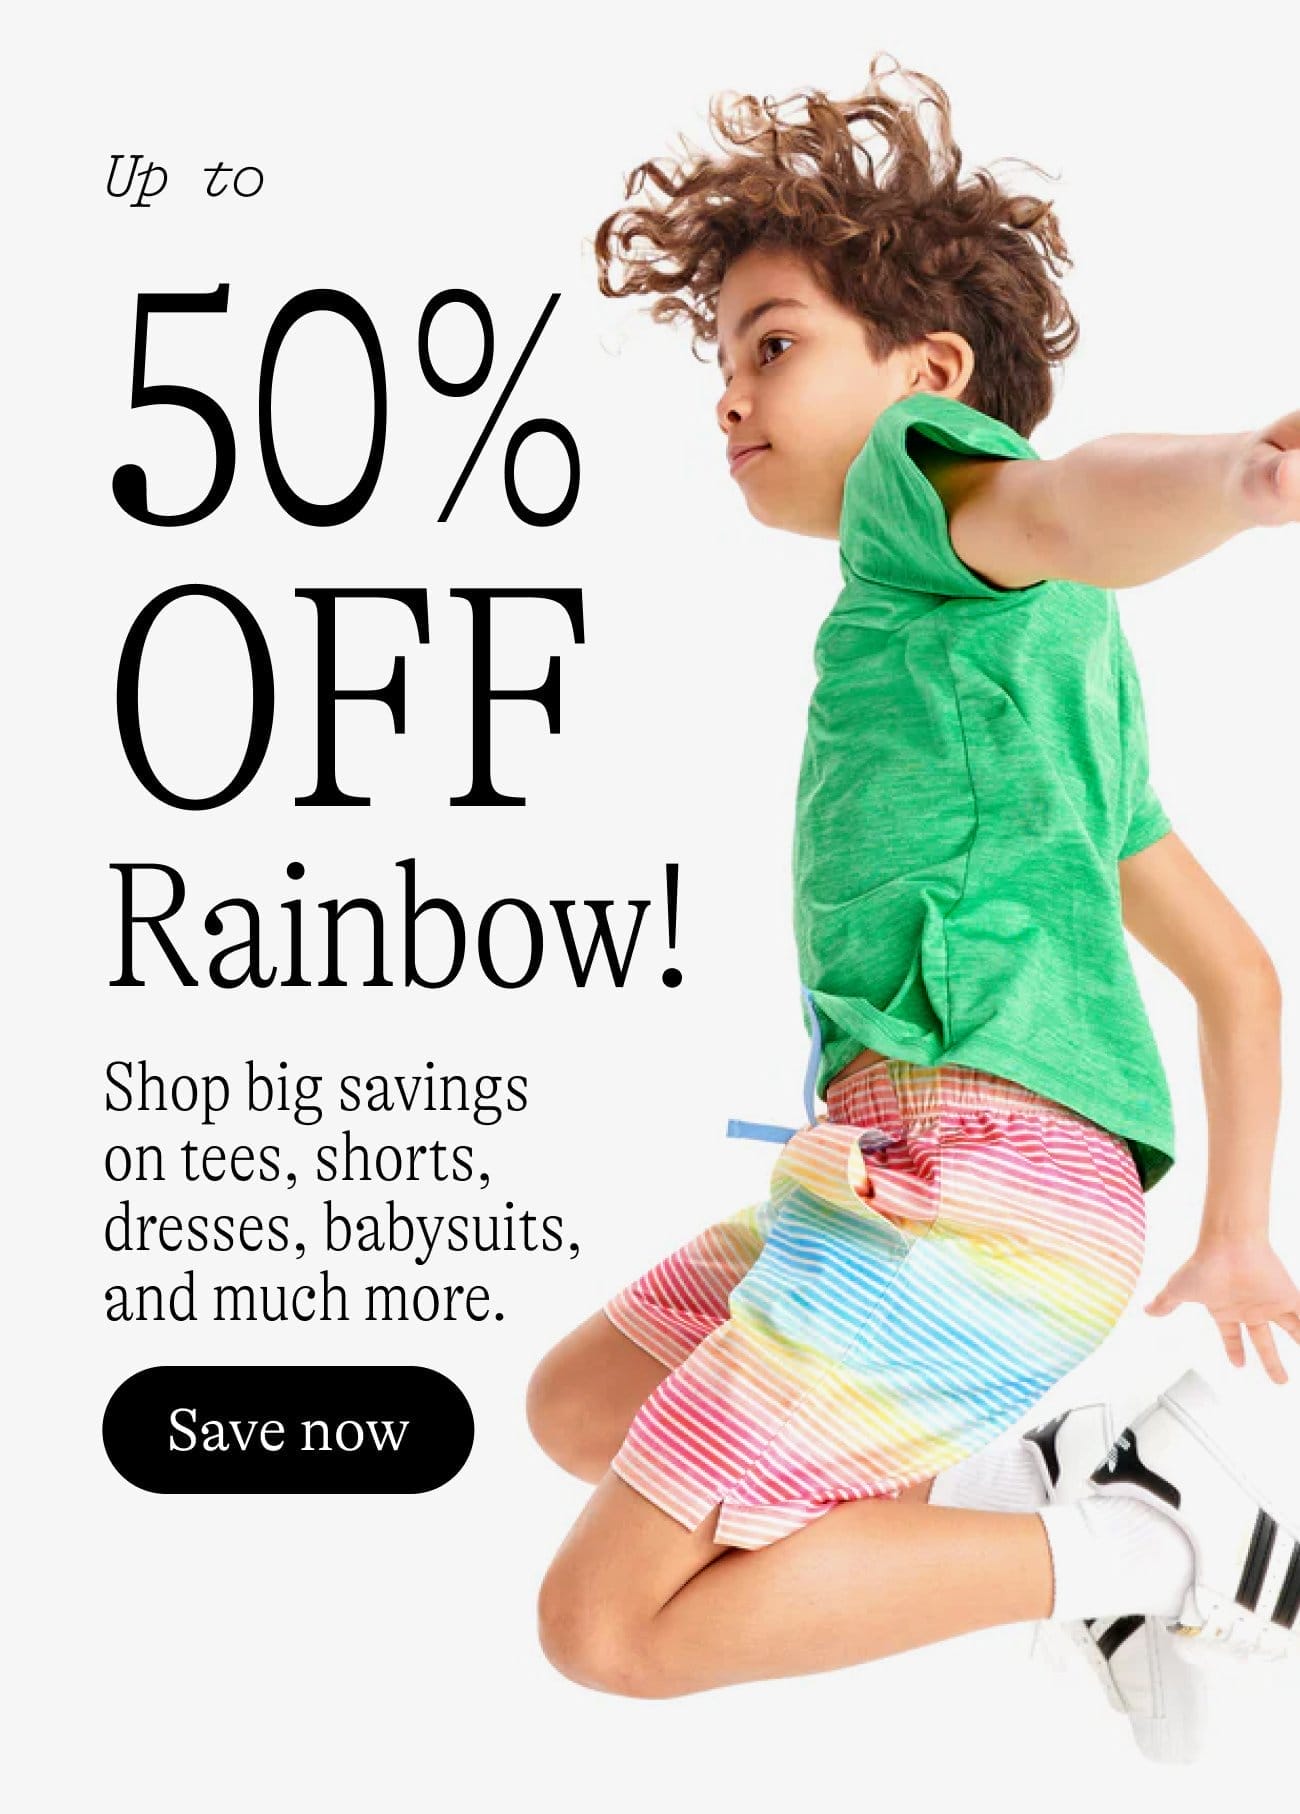 Up to 50% Off Rainbow: Shop big savings on tees, shorts, dresses, babysuits, and much more. Shop now